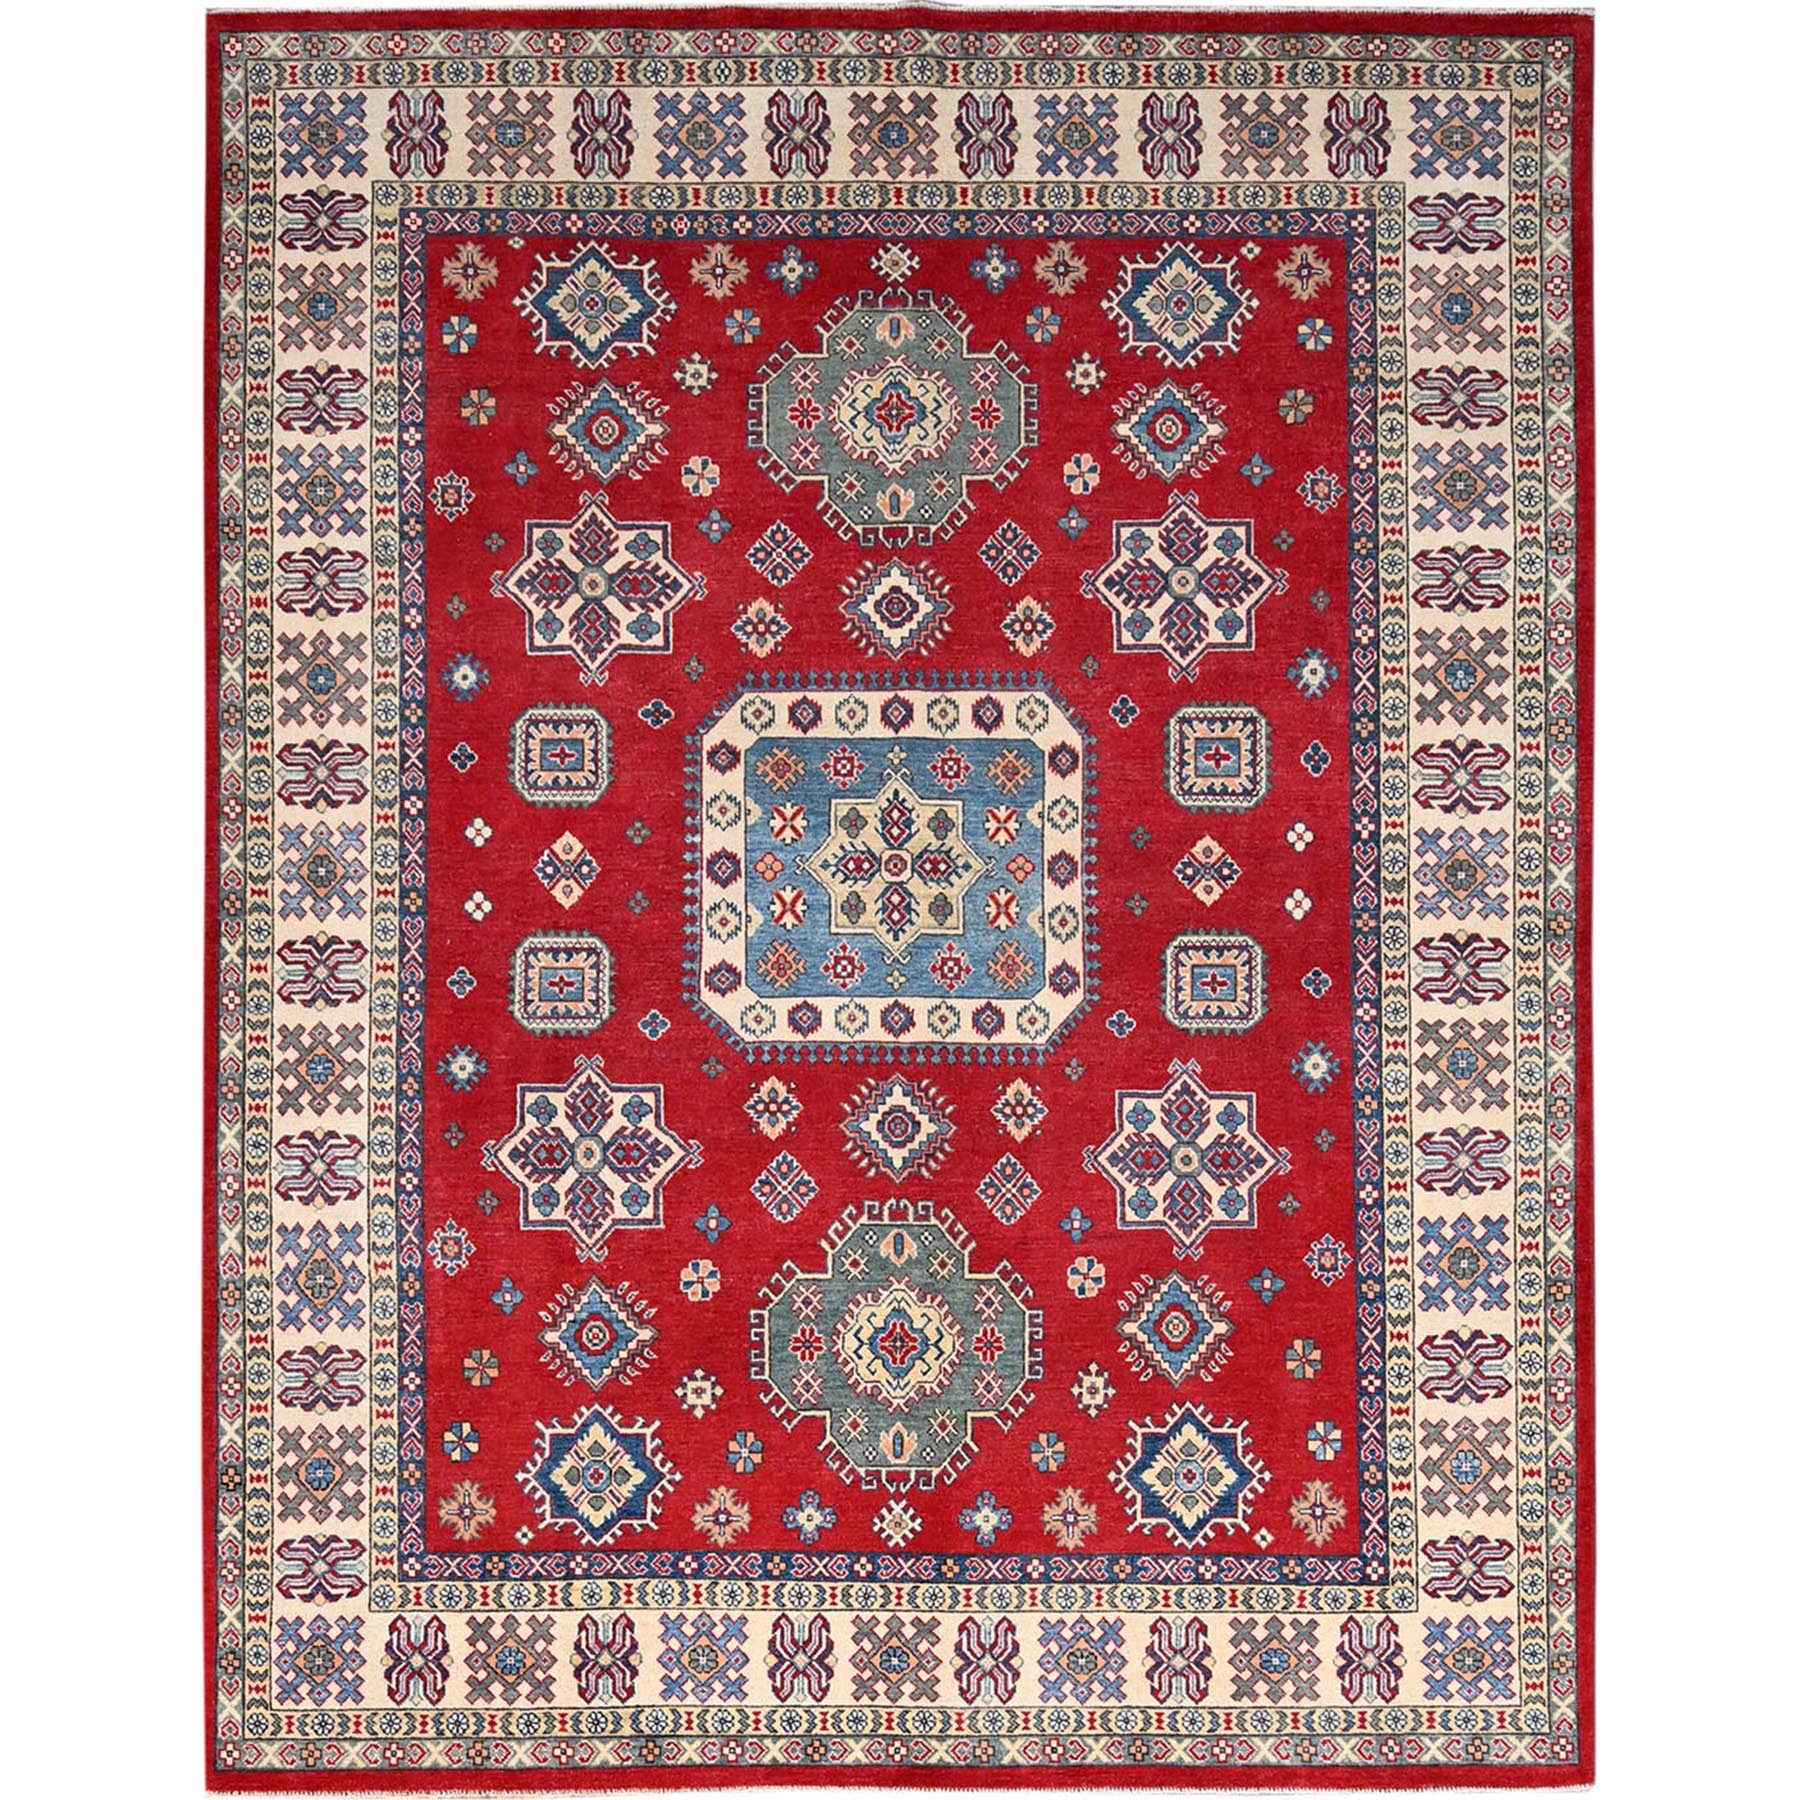 Crimson Red Denser Weave Hand Knotted  Kazak With Tribal Medallion Design Soft And Shiny Wool, Organic Dyes, Oriental Rug